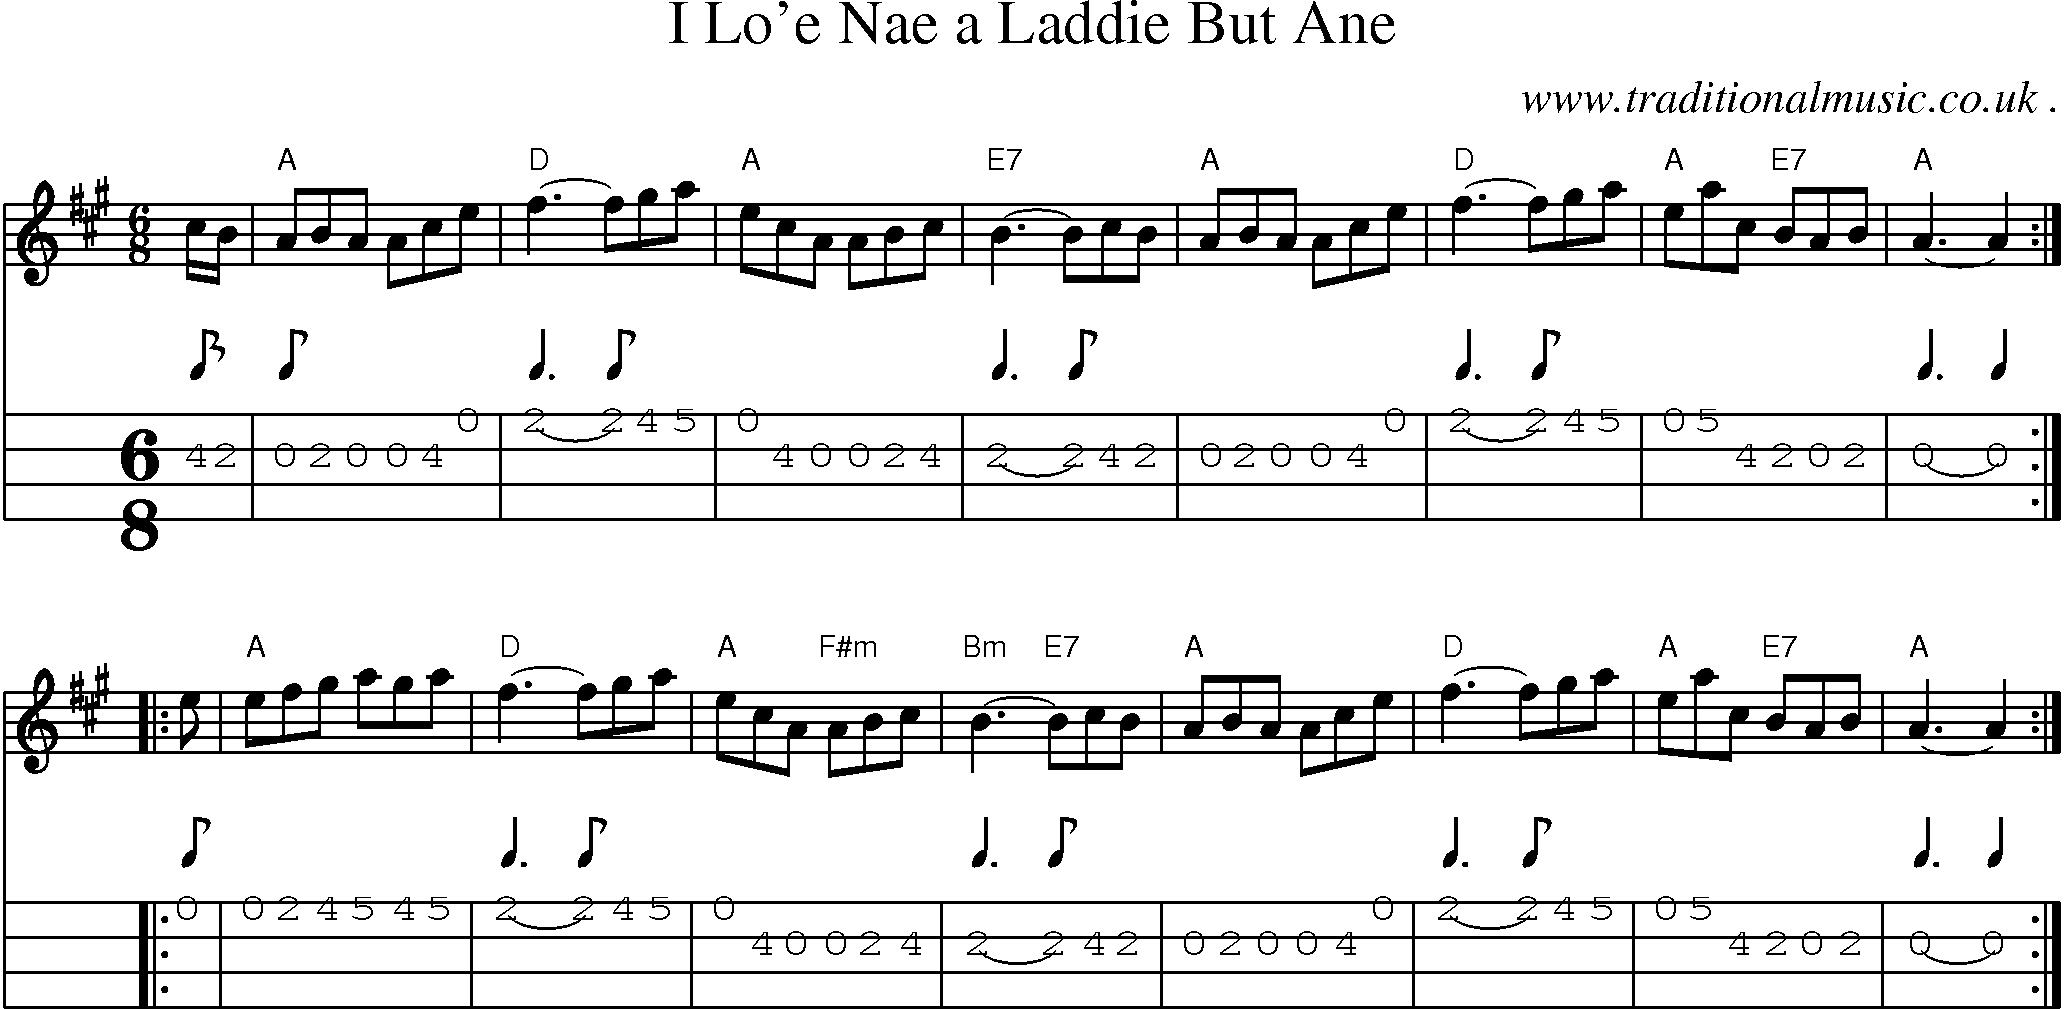 Sheet-music  score, Chords and Mandolin Tabs for I Loe Nae A Laddie But Ane